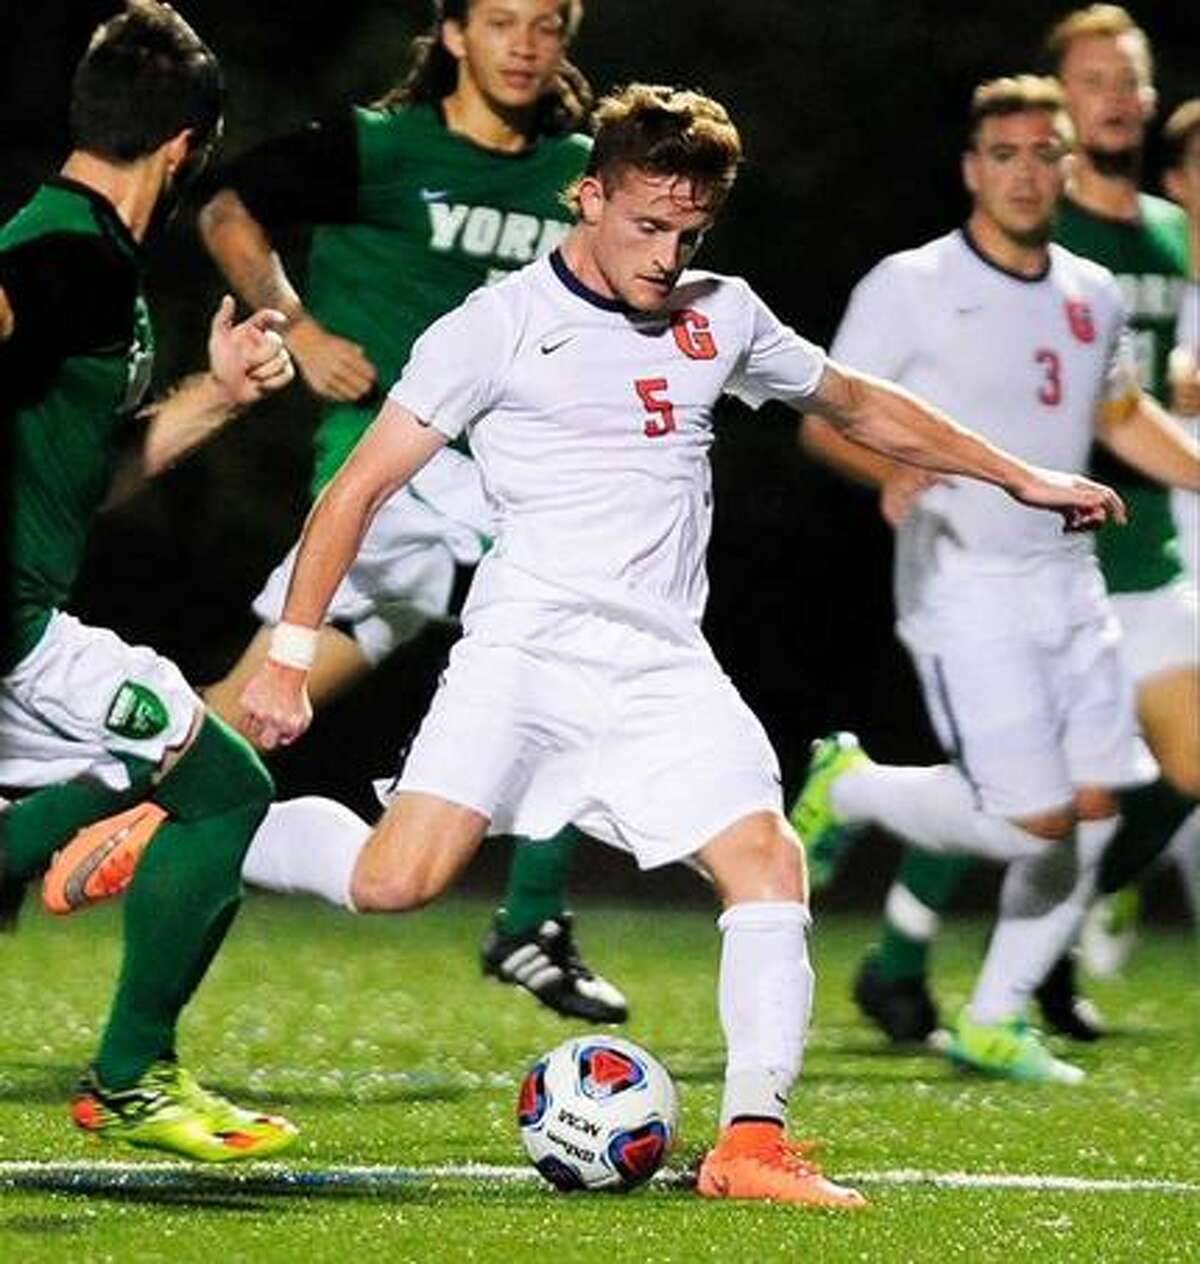 Greenwich High School graduate Patrick Santini was recently named the Centennial Conference Player of the Year after scoring a team-high 20 goals for the Gettysburg College men?’s soccer team this fall.